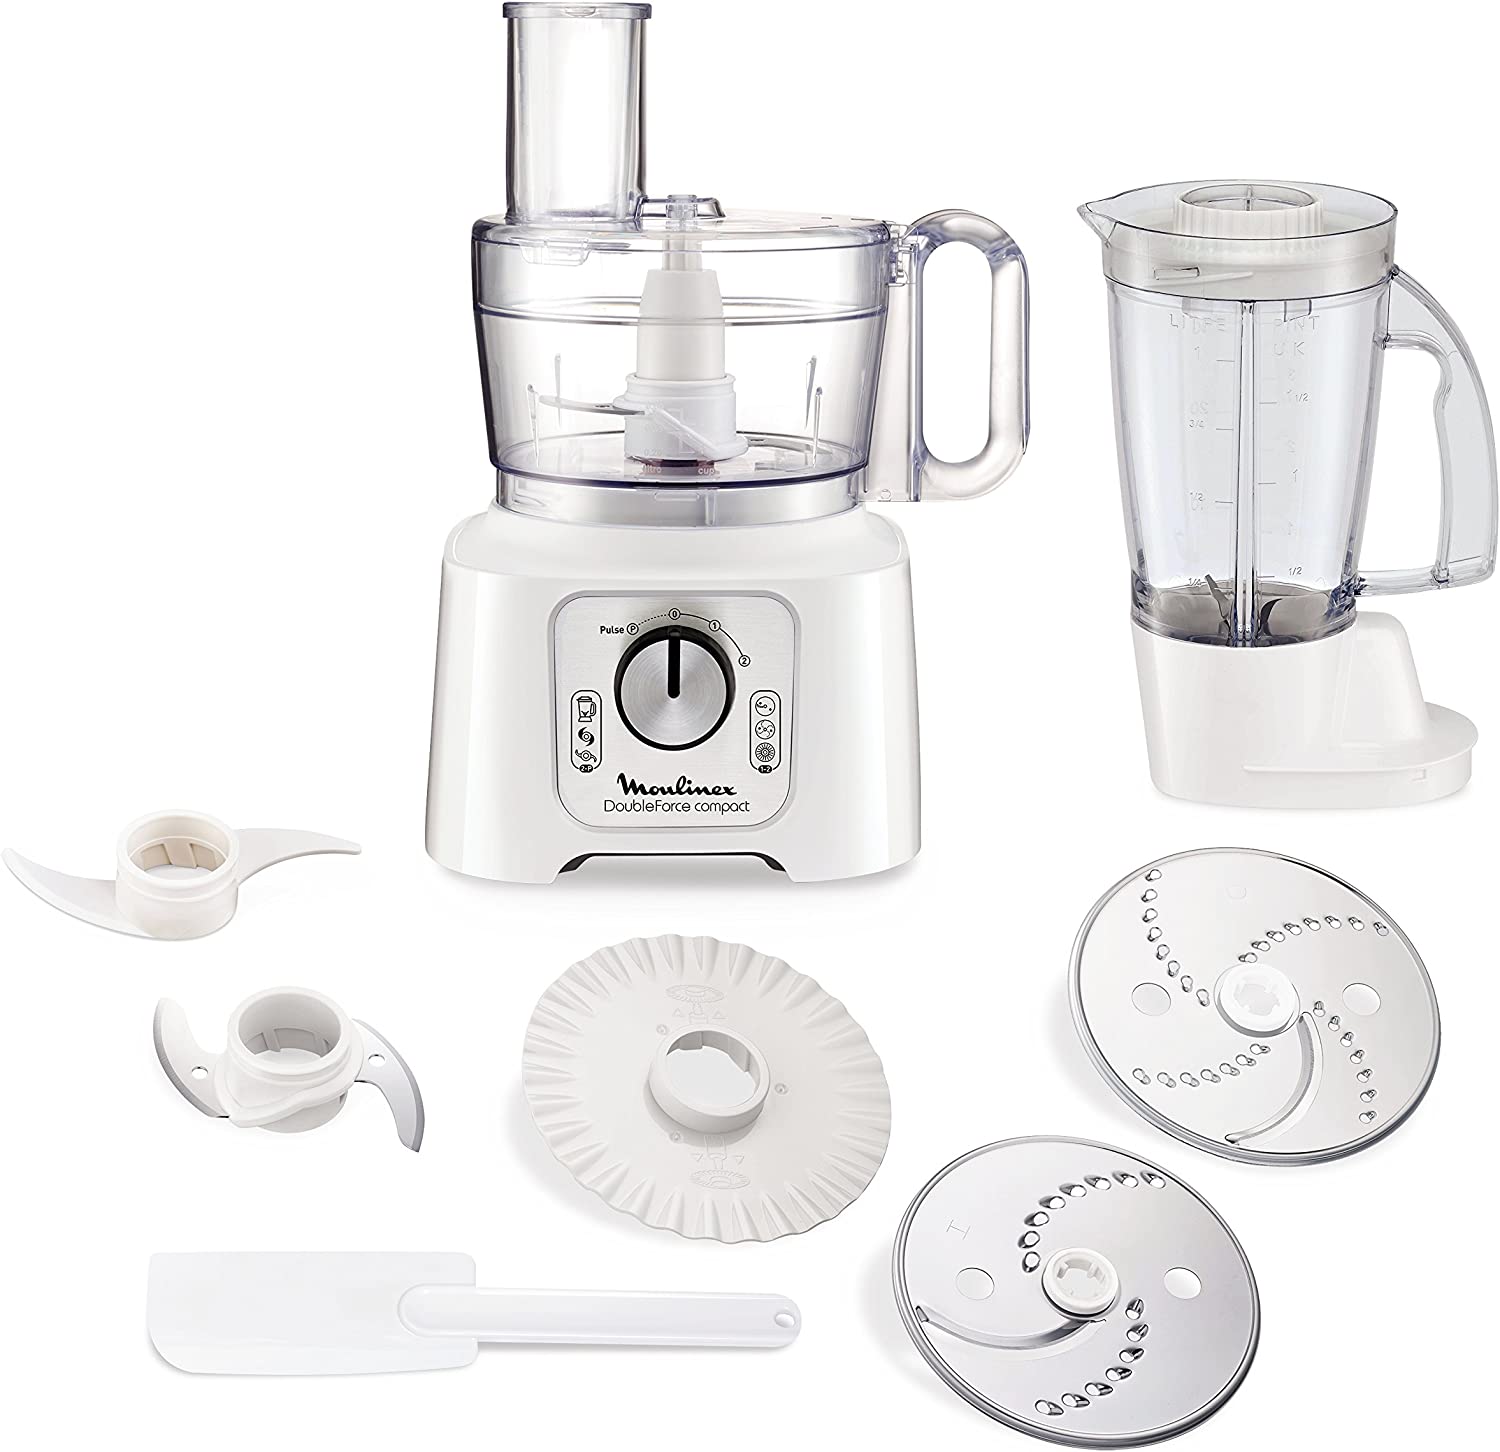 Moulinex double-force compact food processor